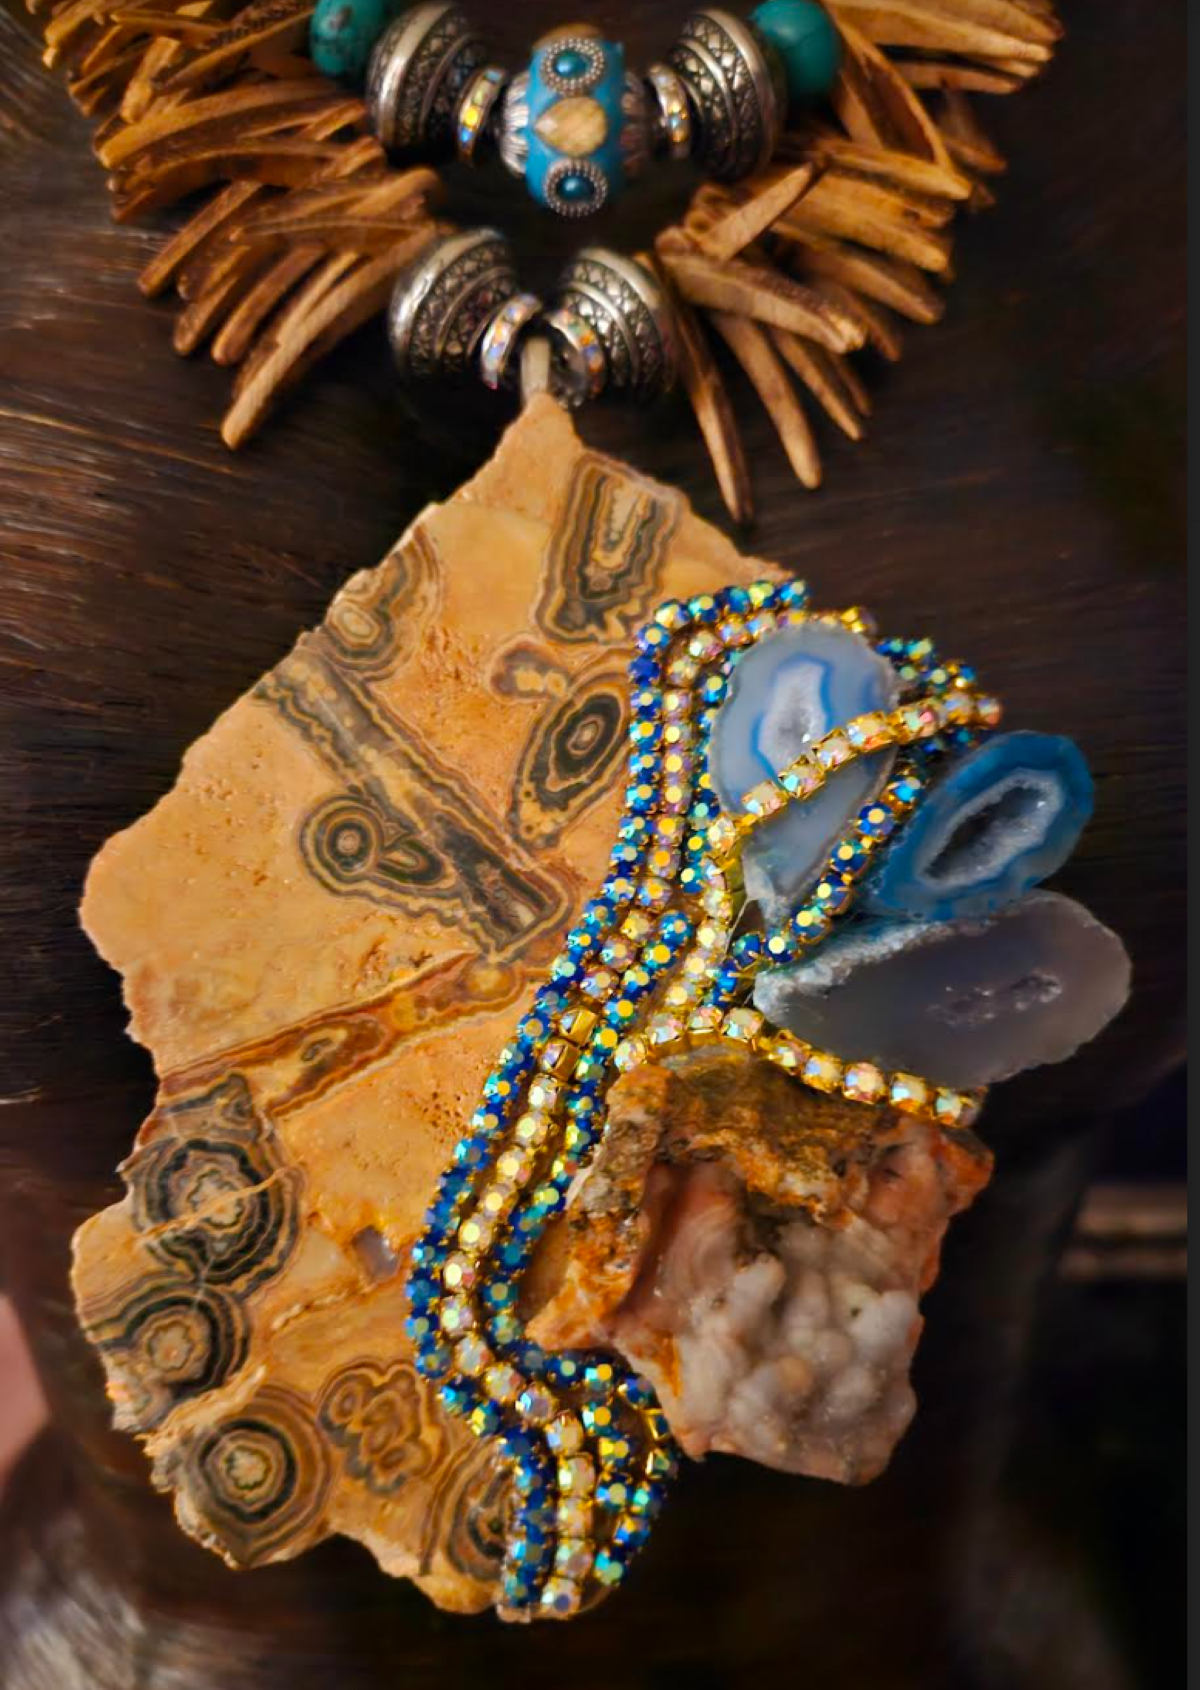 Flowering Onyx Slab with Blue Geodes Pendant on a Coconut Fringe Necklace, Earthy Exotic Gemstone Chest Piece, Casual Attire Necklace